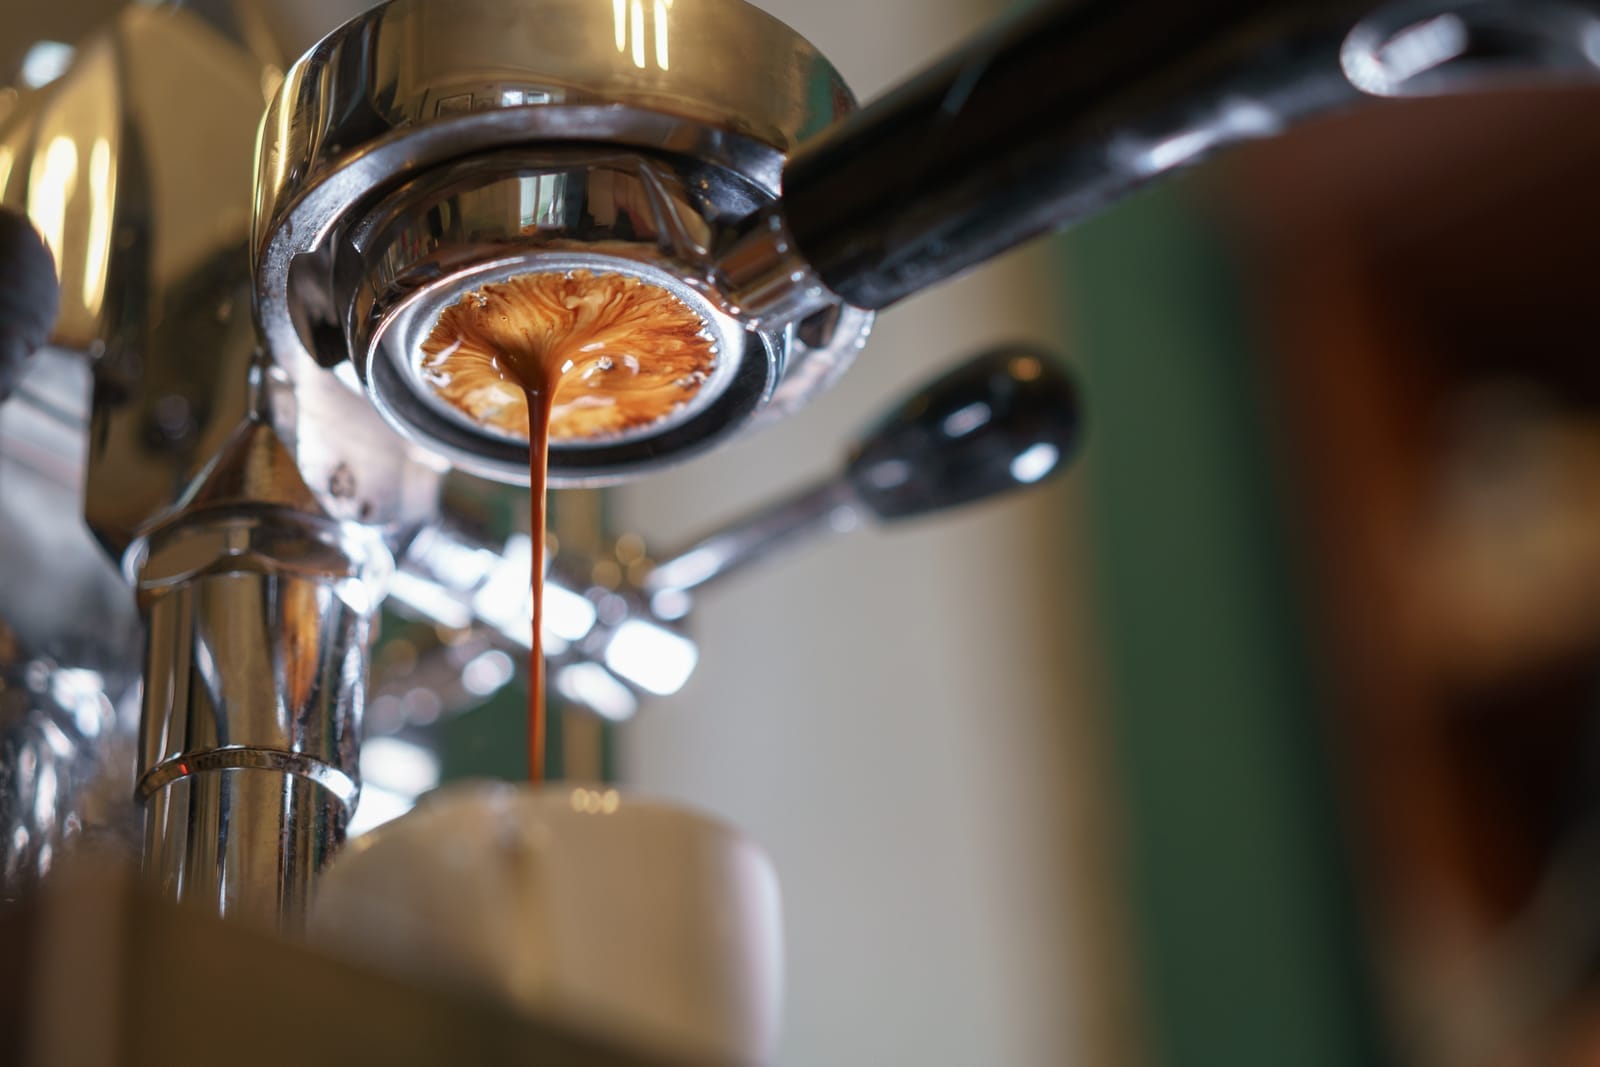 Espresso pouring from machine into cup with an even flow.